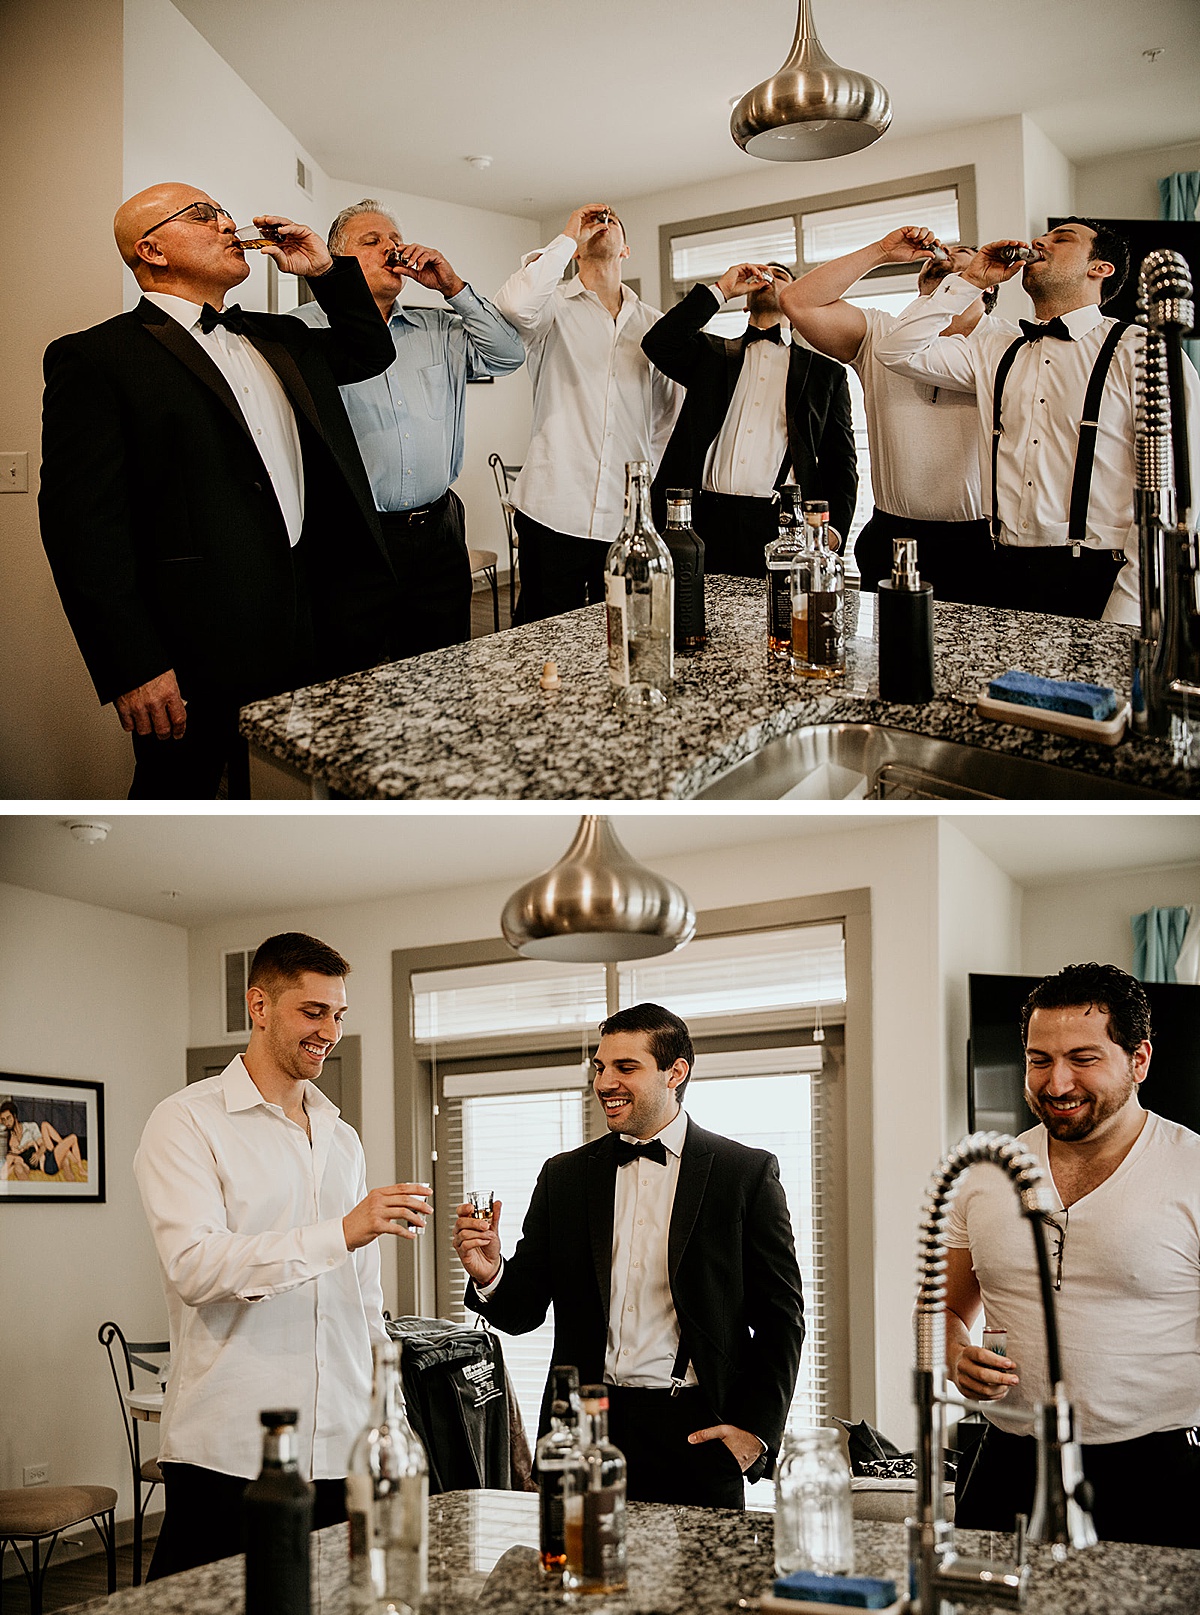 Groom and groomsmen taking a shot of whiskey.